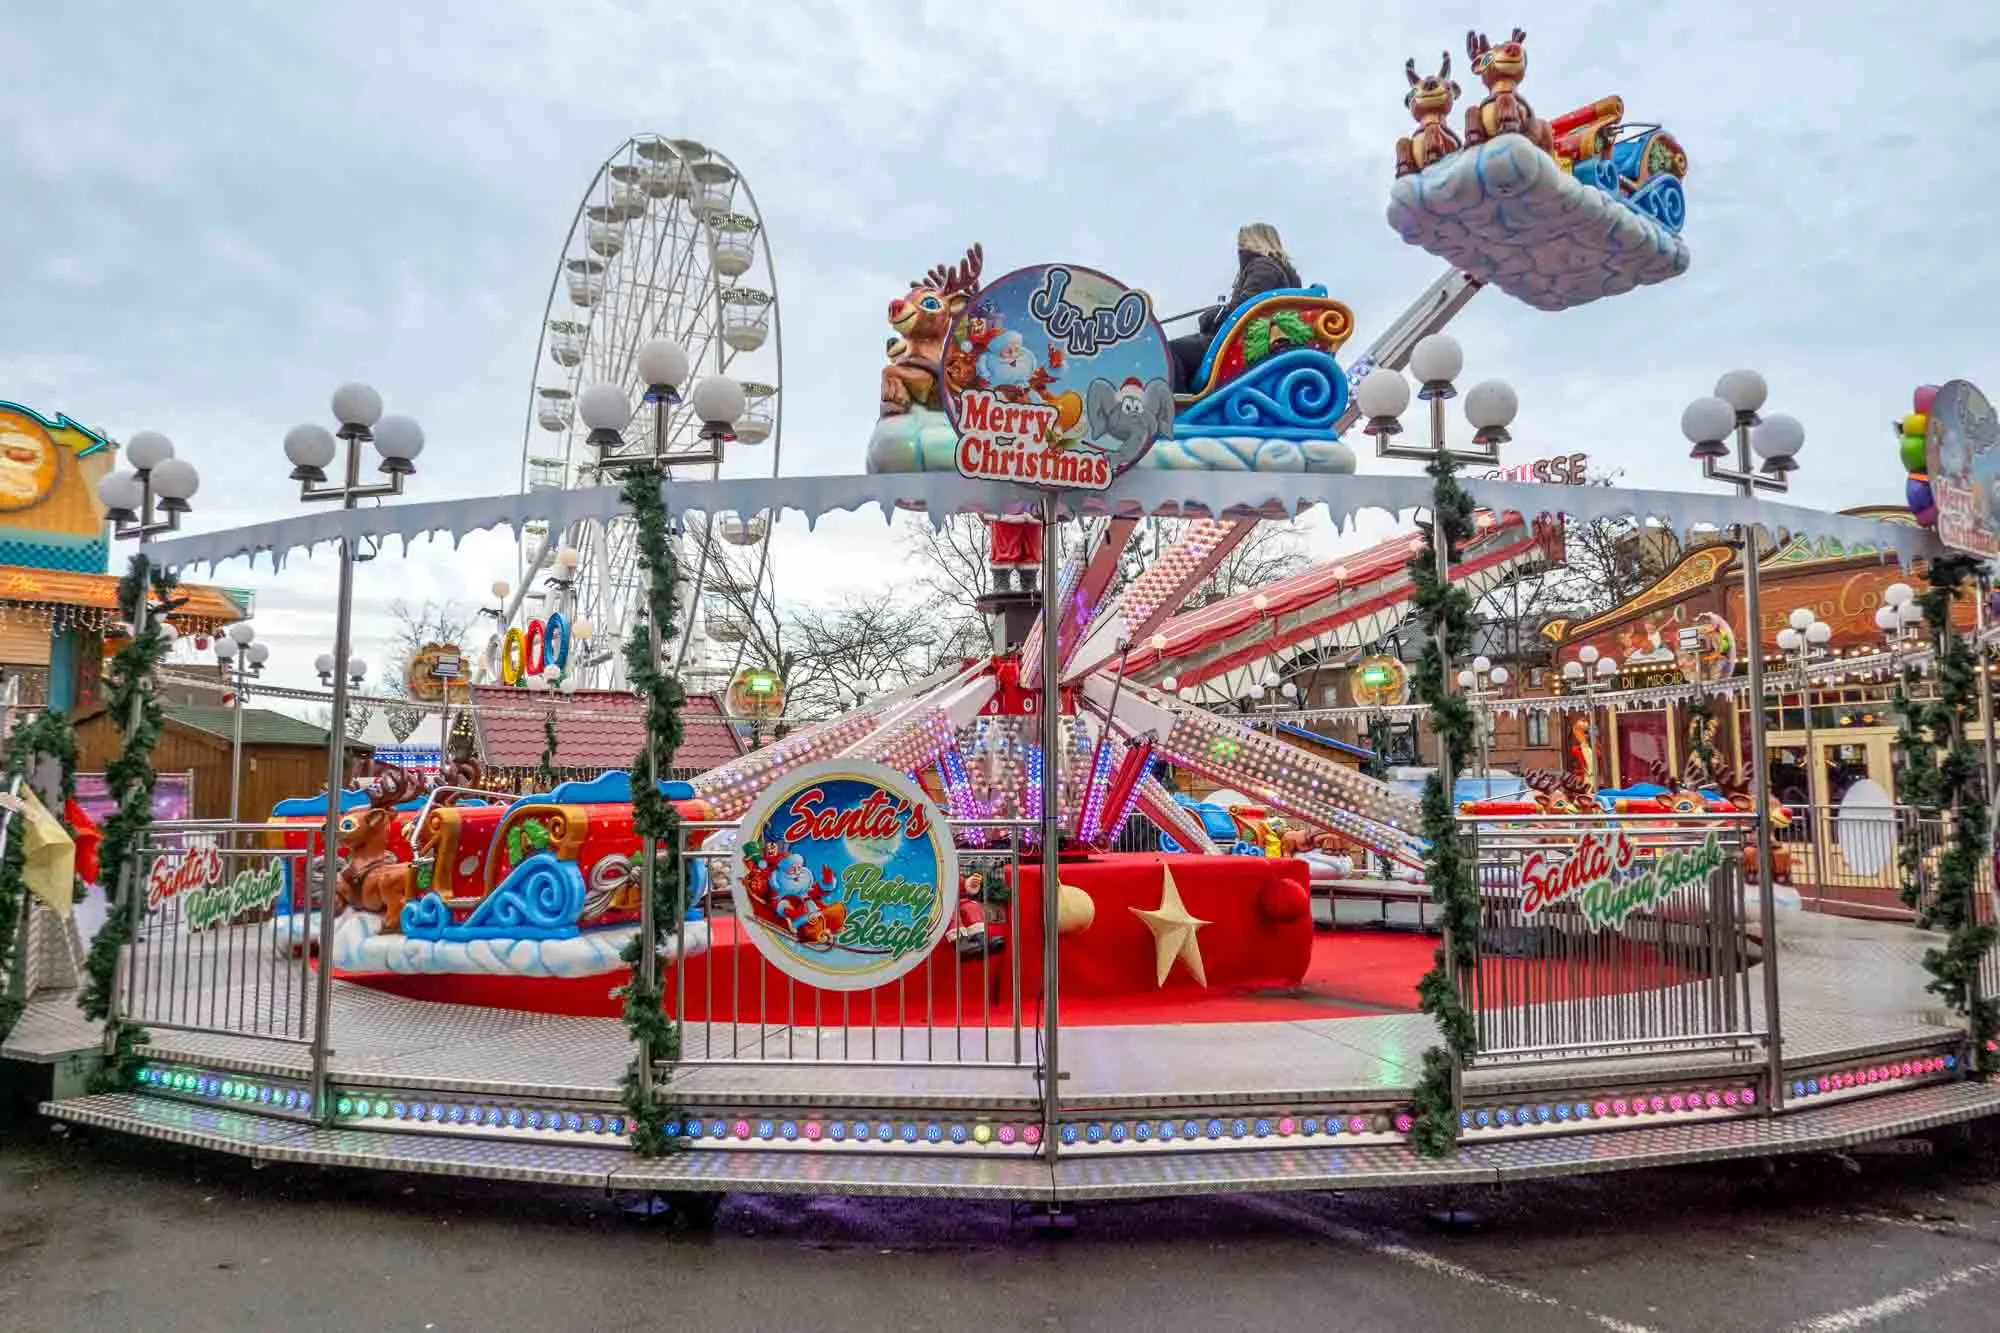 Amusement ride decorated with a Christmas theme